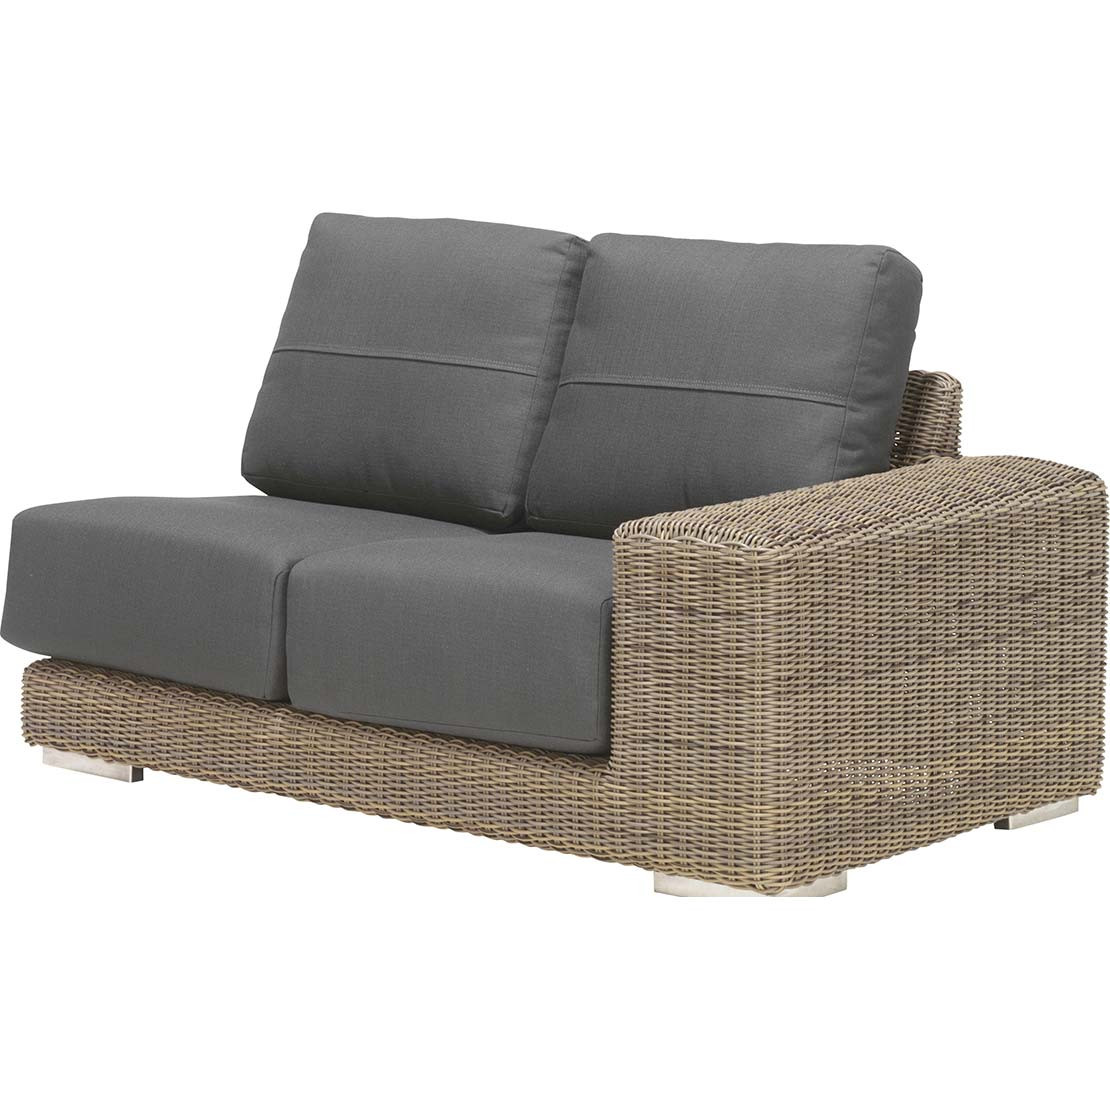 Kingston modular 2 seater left with 4 cushions